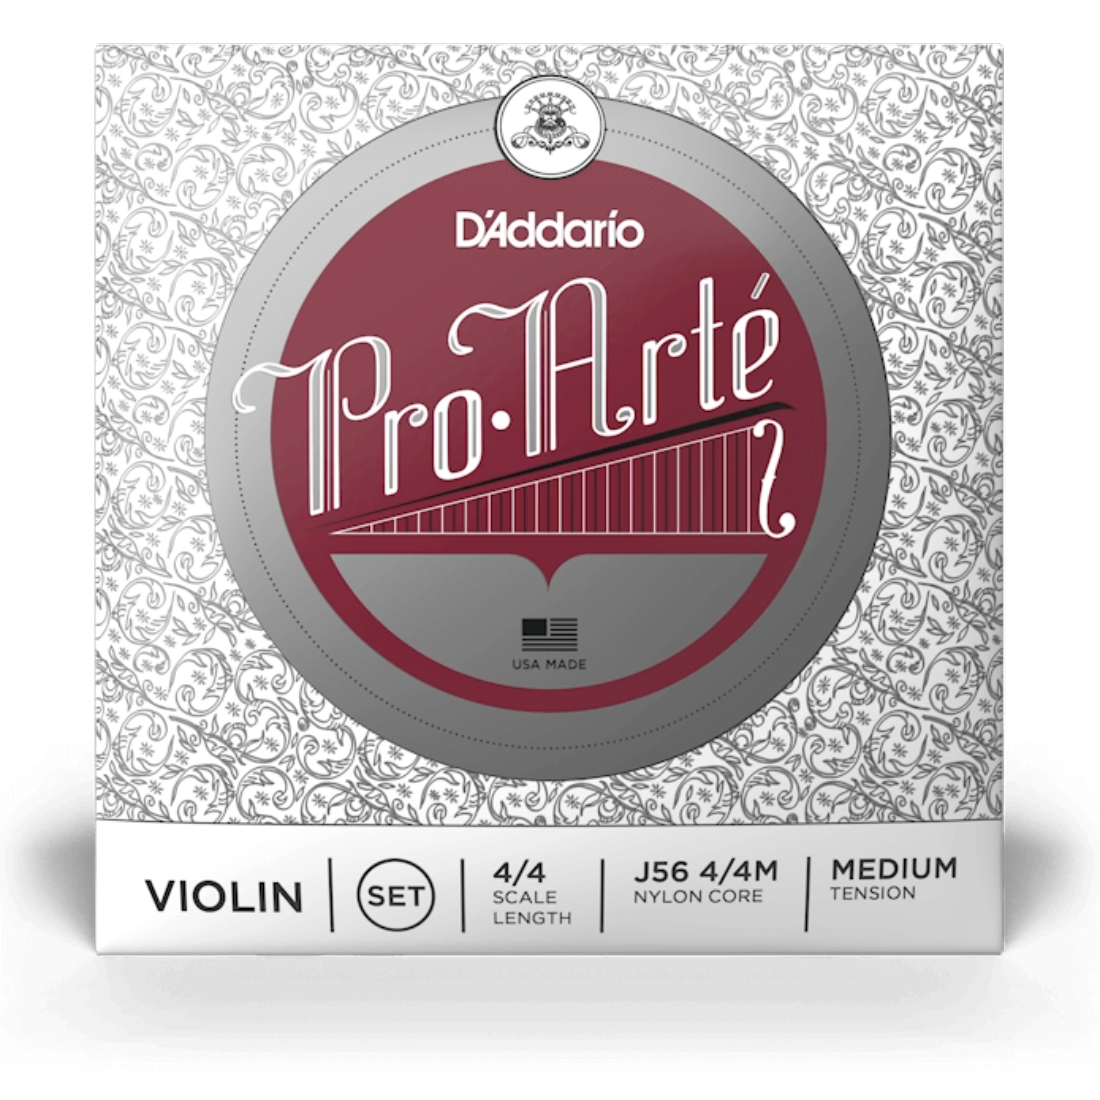 Box of Pro-Arte Violin strings by D'Addario, silver with a red circle in the middle 